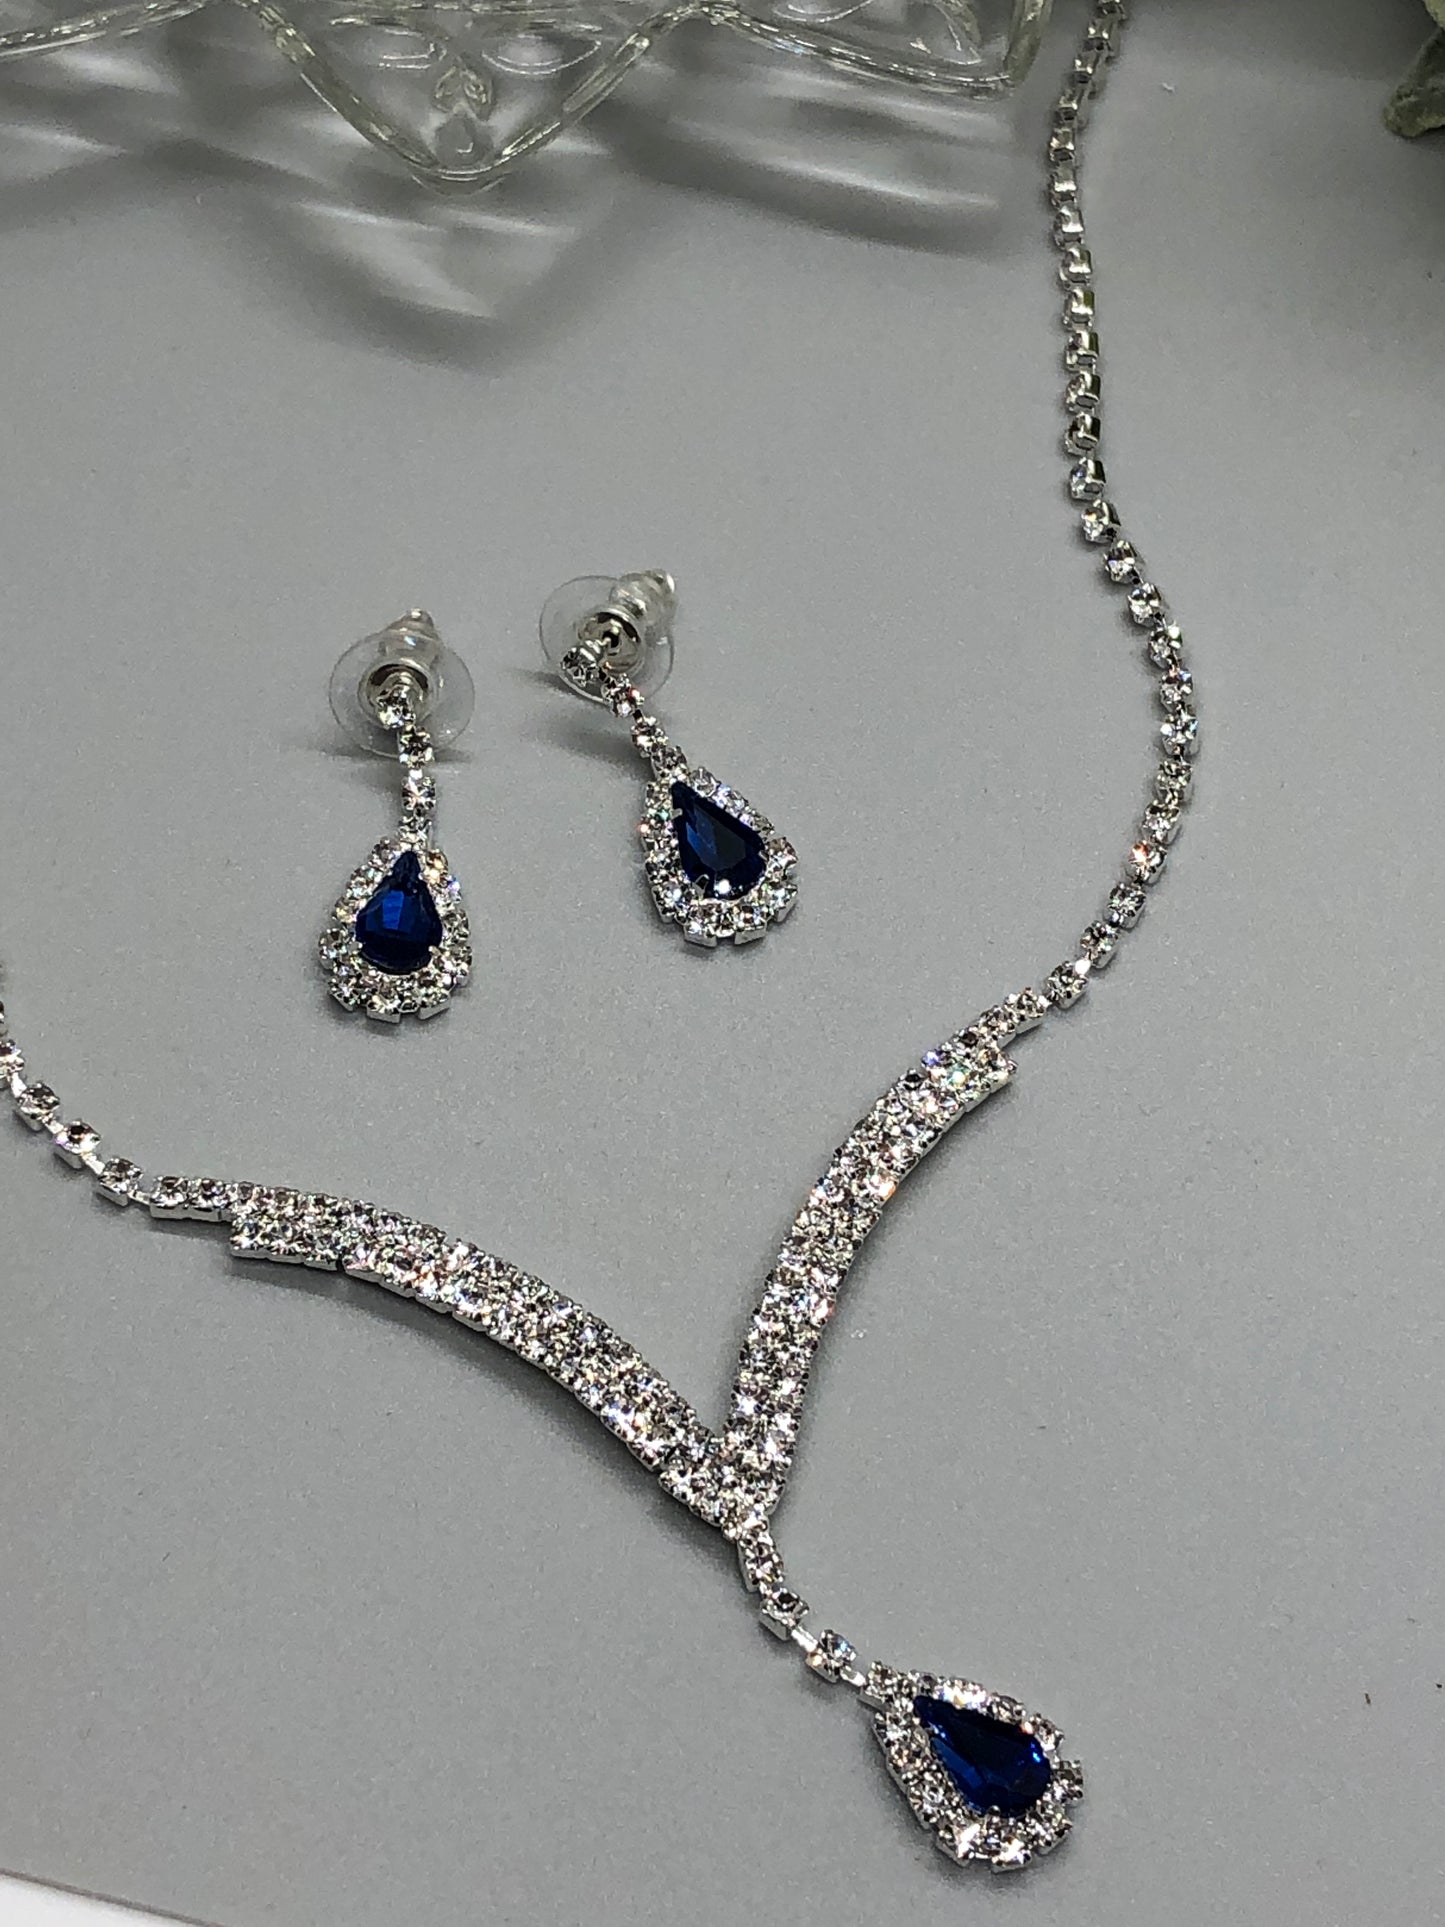 Navy Blue Crystal Rhinestone Bridal Necklace Earrings Sets Wedding Formal Shower Party Event Accessories #007